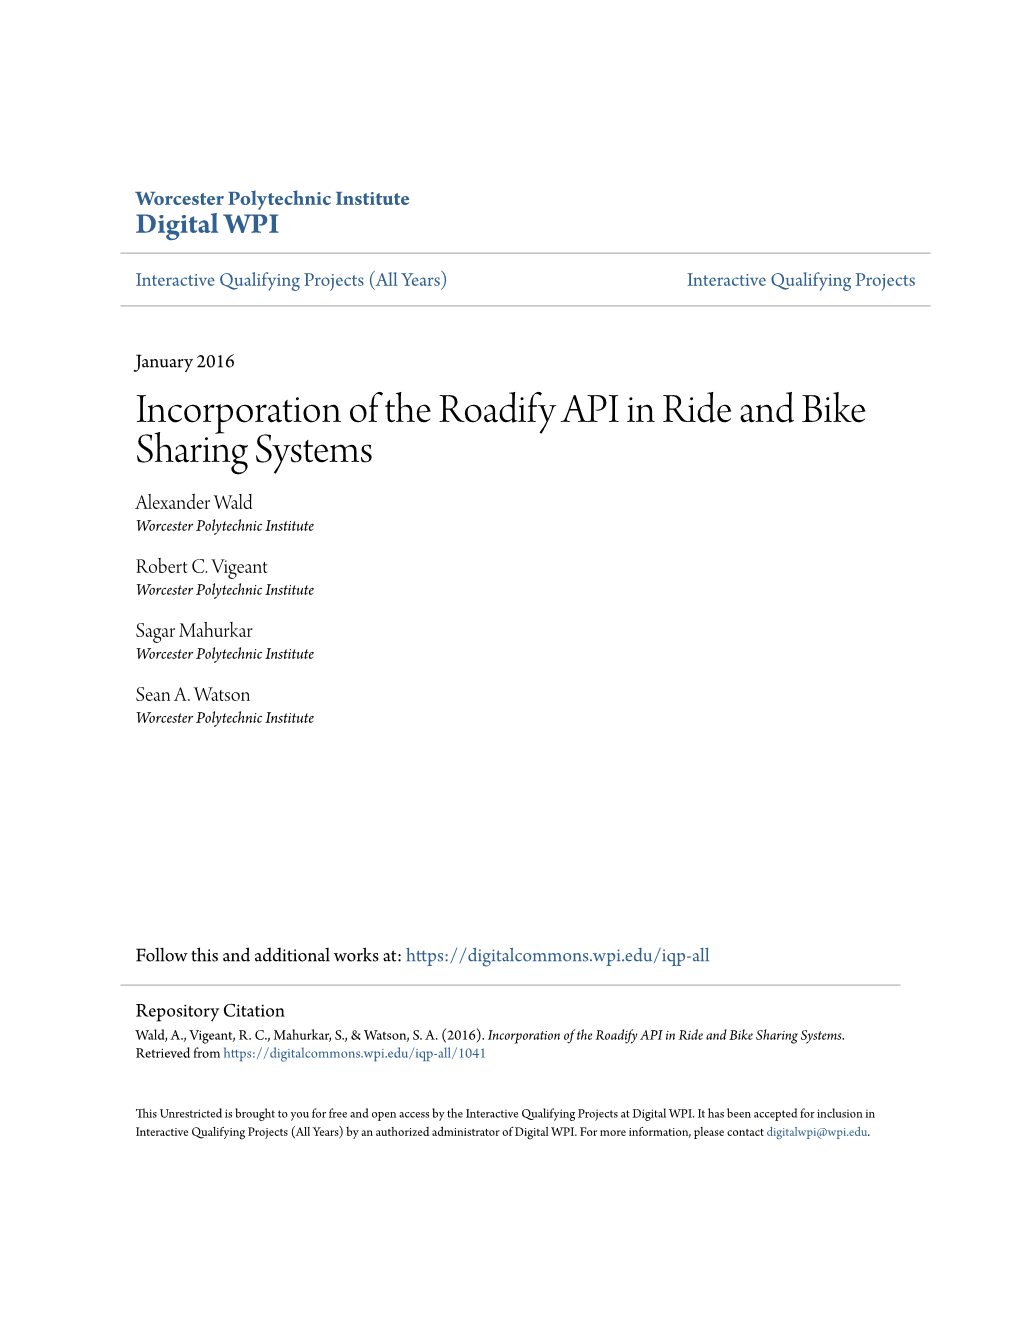 Incorporation of the Roadify API in Ride and Bike Sharing Systems Alexander Wald Worcester Polytechnic Institute